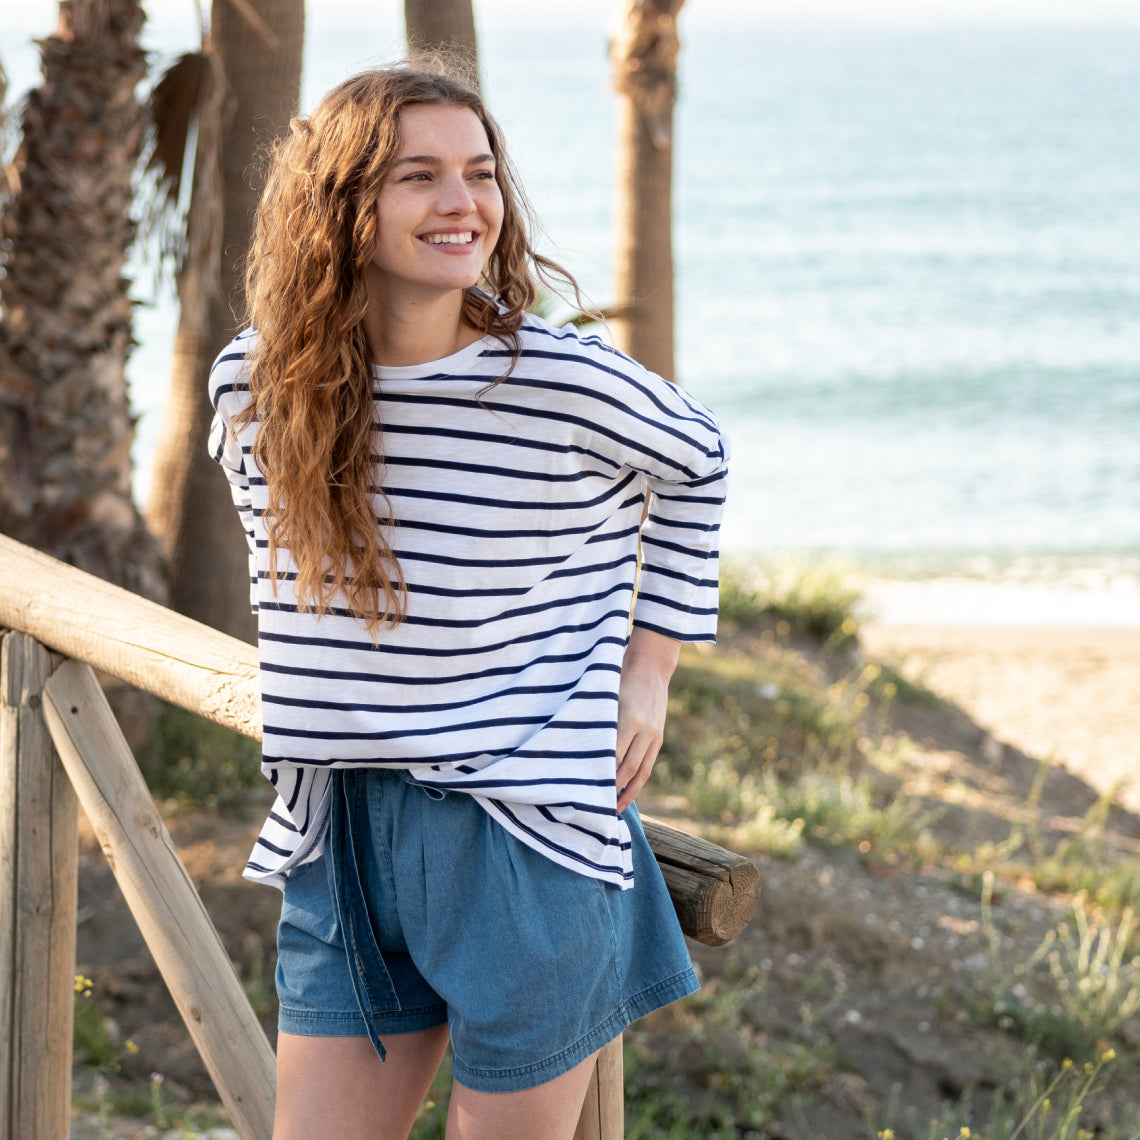 female wearing a navy striped tee shirt leaning on a fence by the beach 